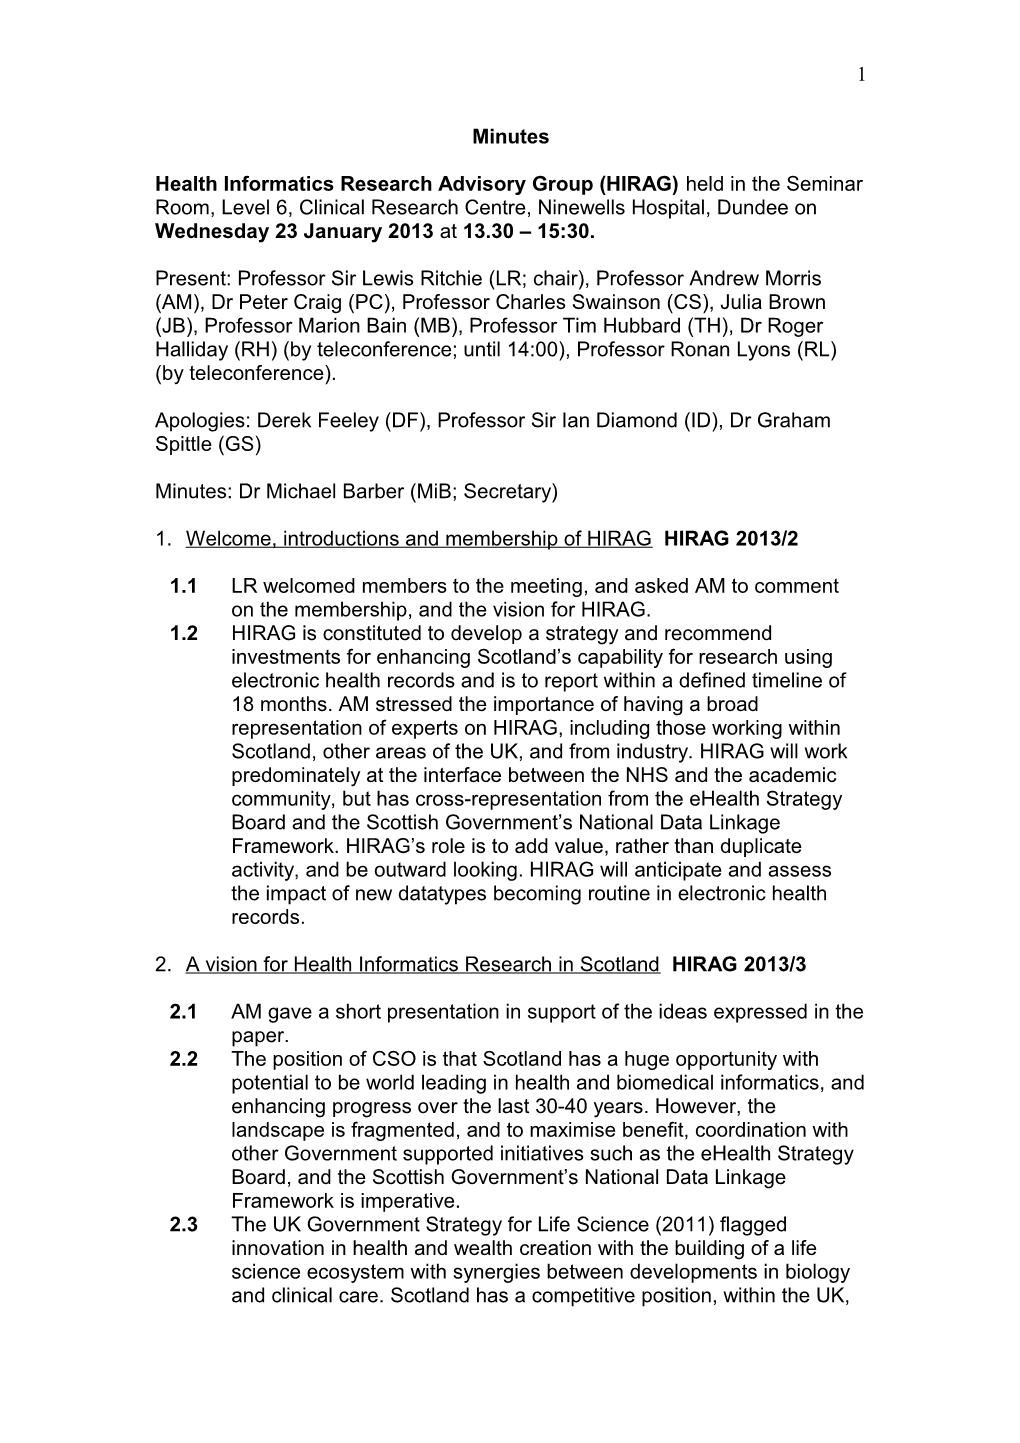 Minutes: Health Informatics Research Advisory Group (HIRAG) Wednesday 23 January 2013 at 13